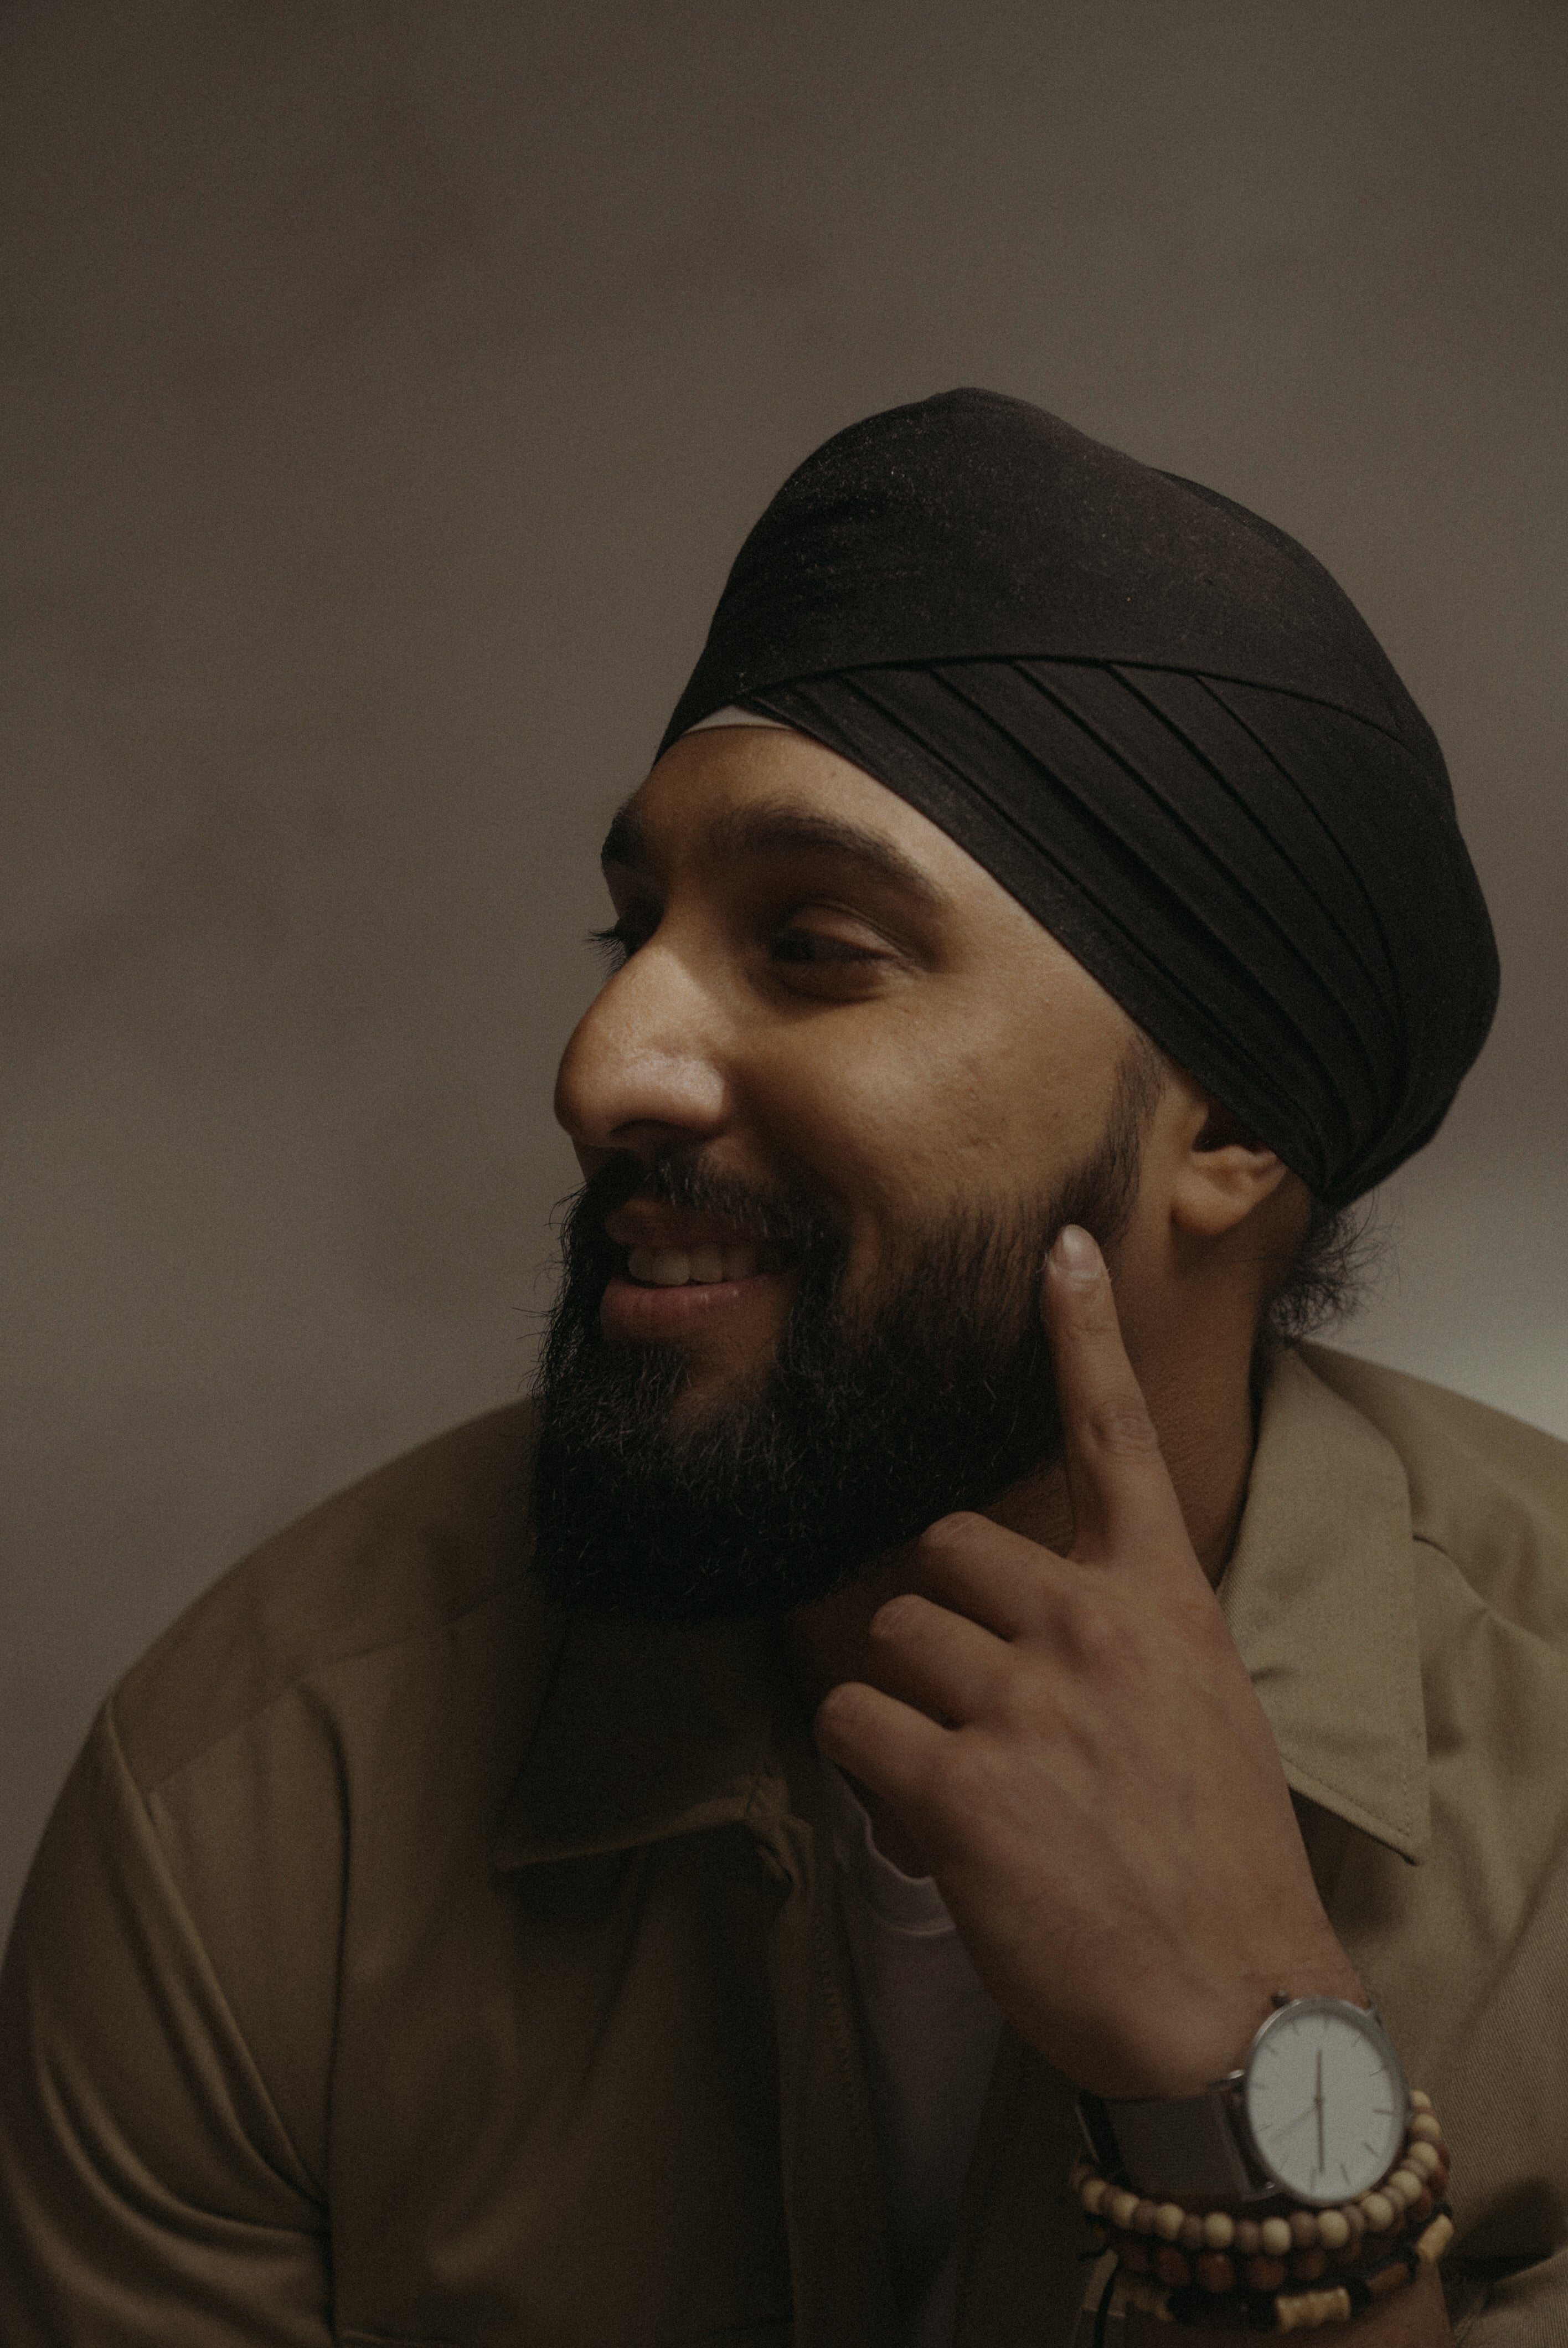 Meet our dost, Sukhman Gill, the community-oriented actor and model that is advocating for all South Asians in entertainment